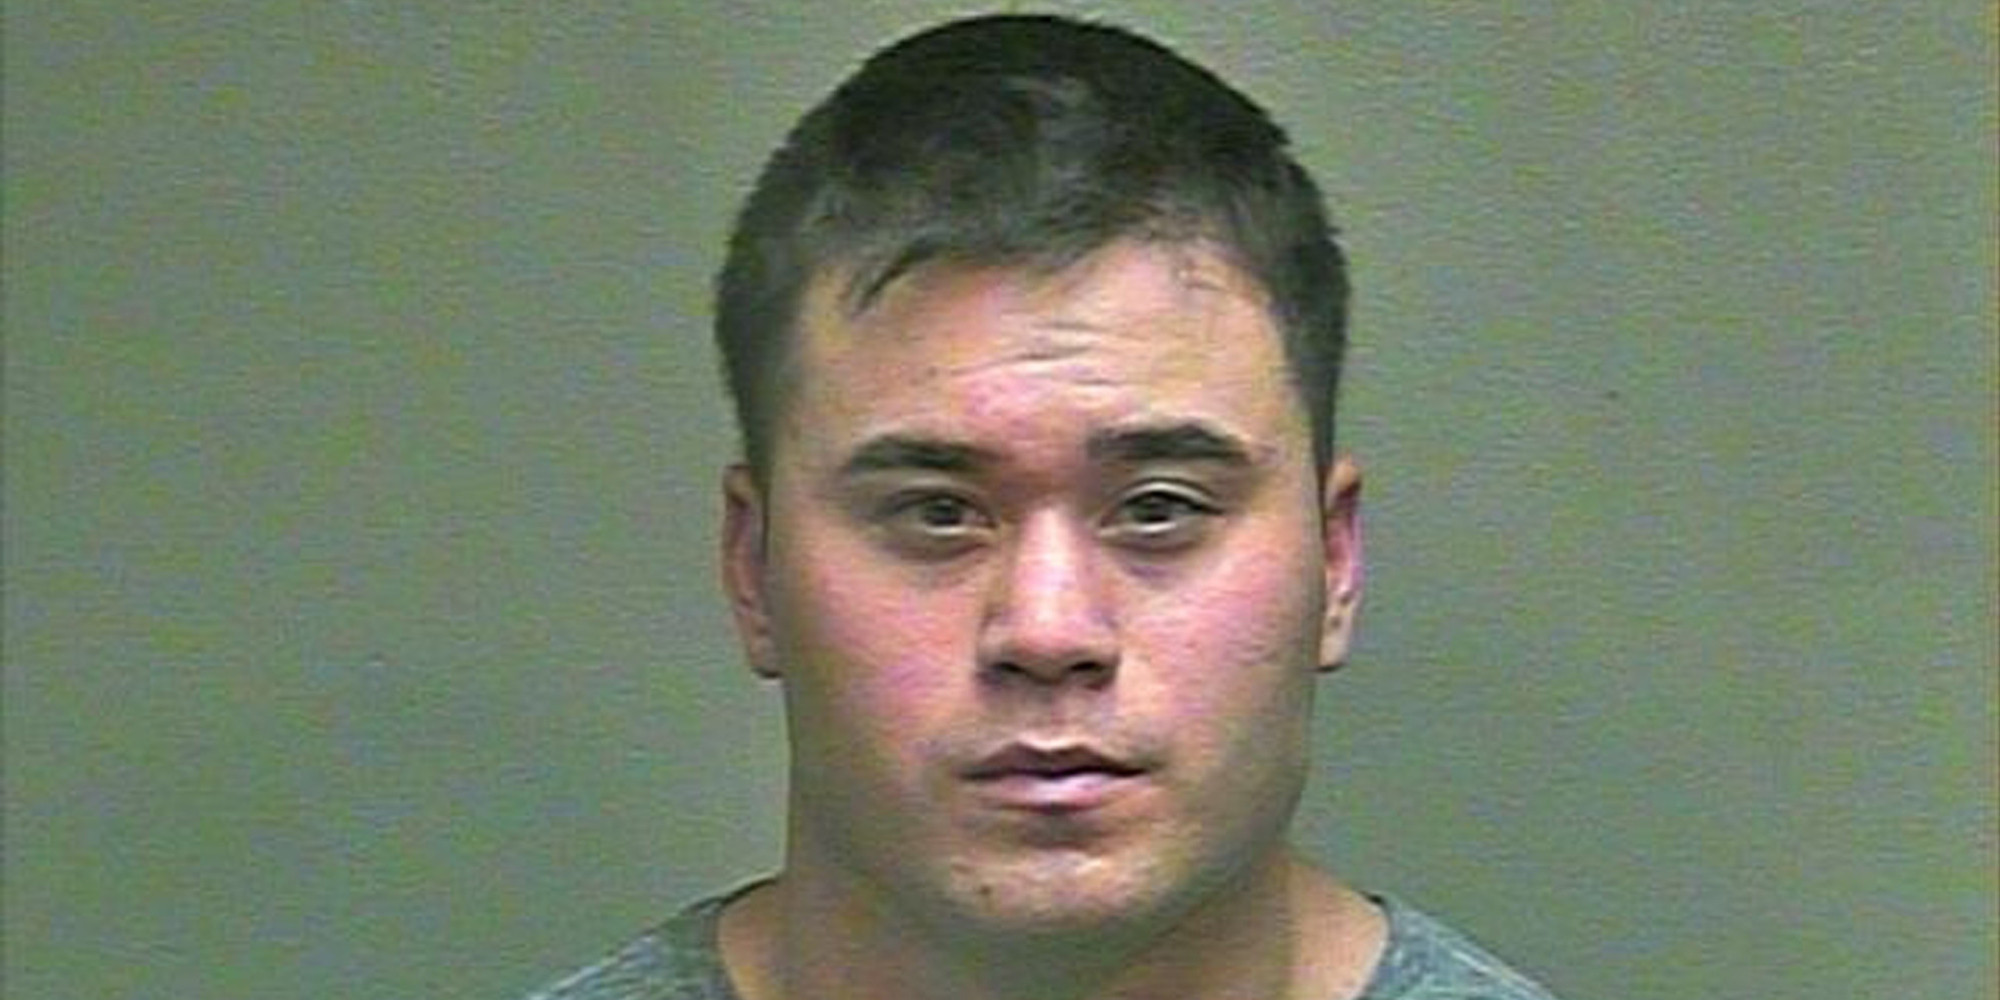 Former Dallasite helped shine spotlight on Holtzclaw case